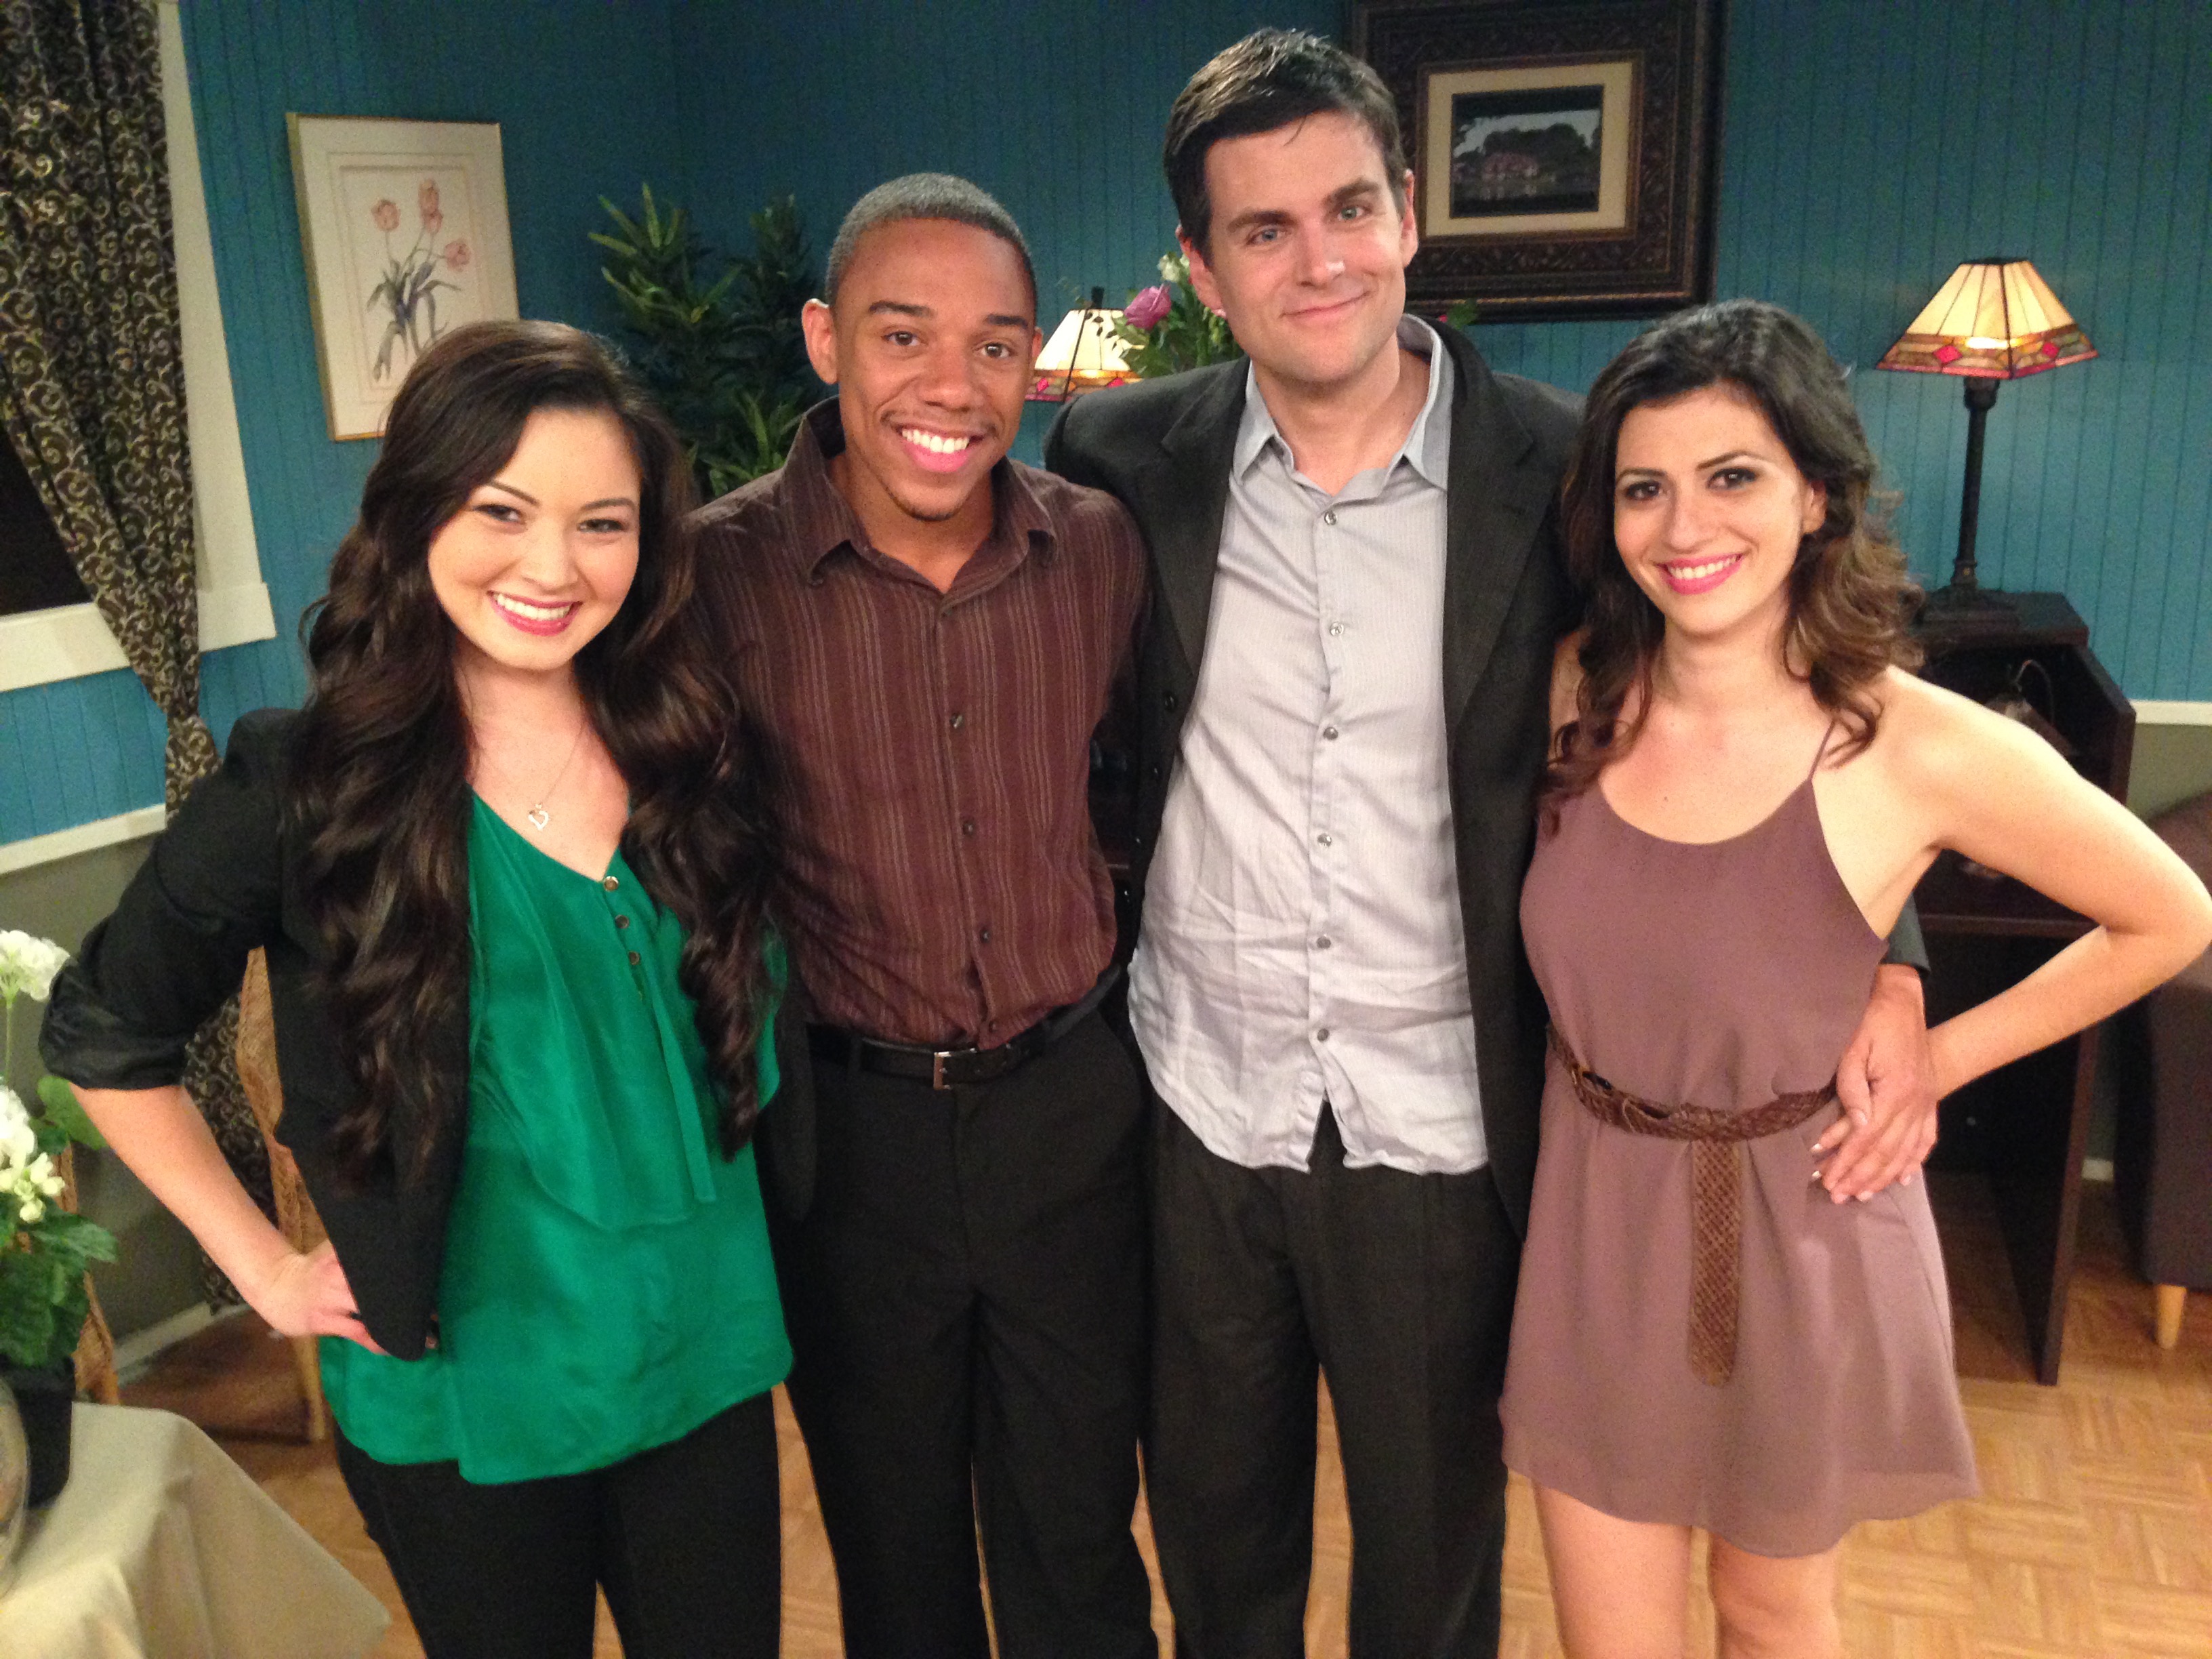 Ashley Parks, Xavier J. Watson, Rich Finley, and Jenna Rougeau on set of Entitled